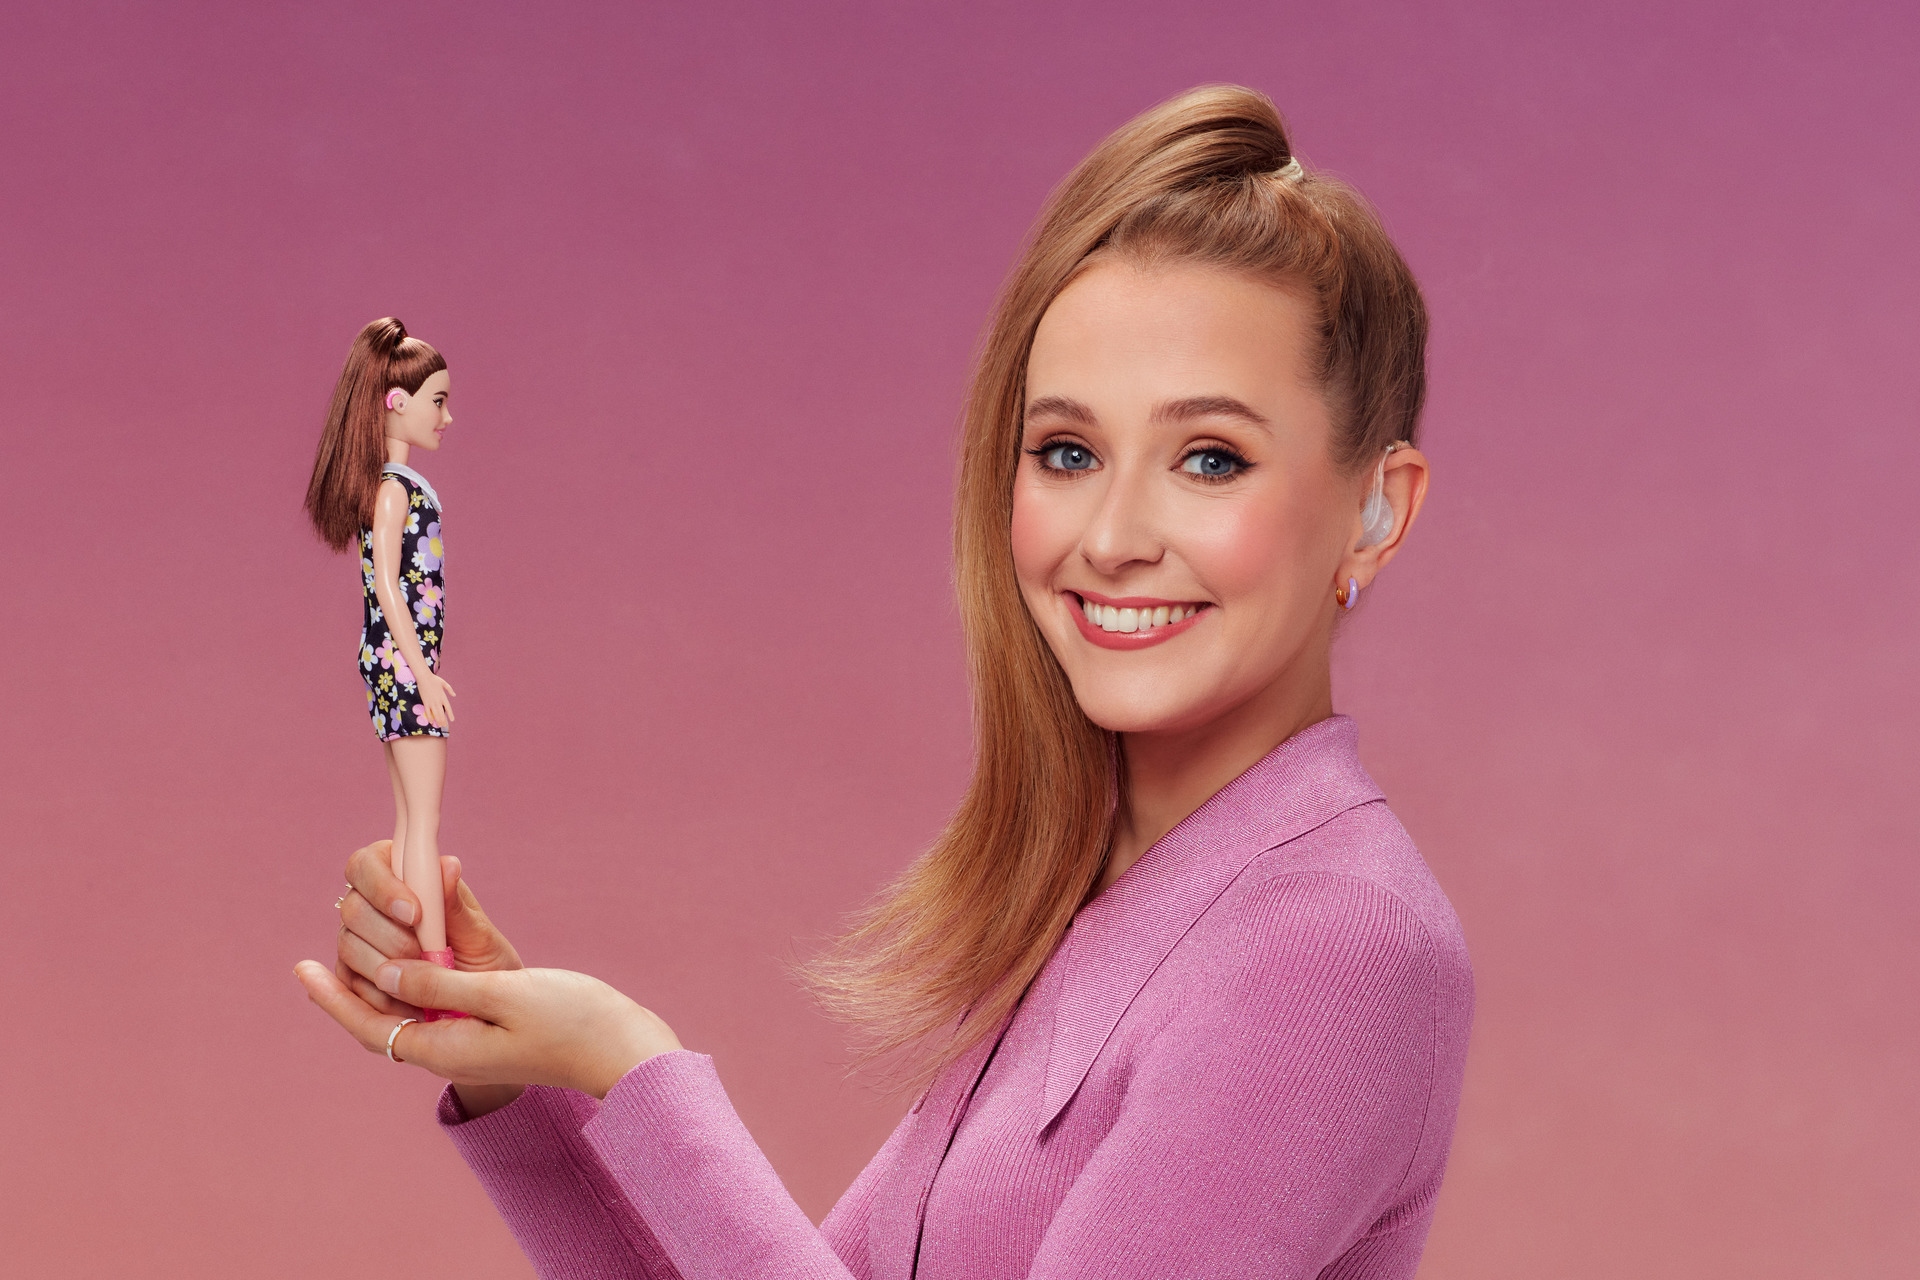 Rose teamed up with Barbie to unveil their first ever doll with behind-the-ear hearing aids.